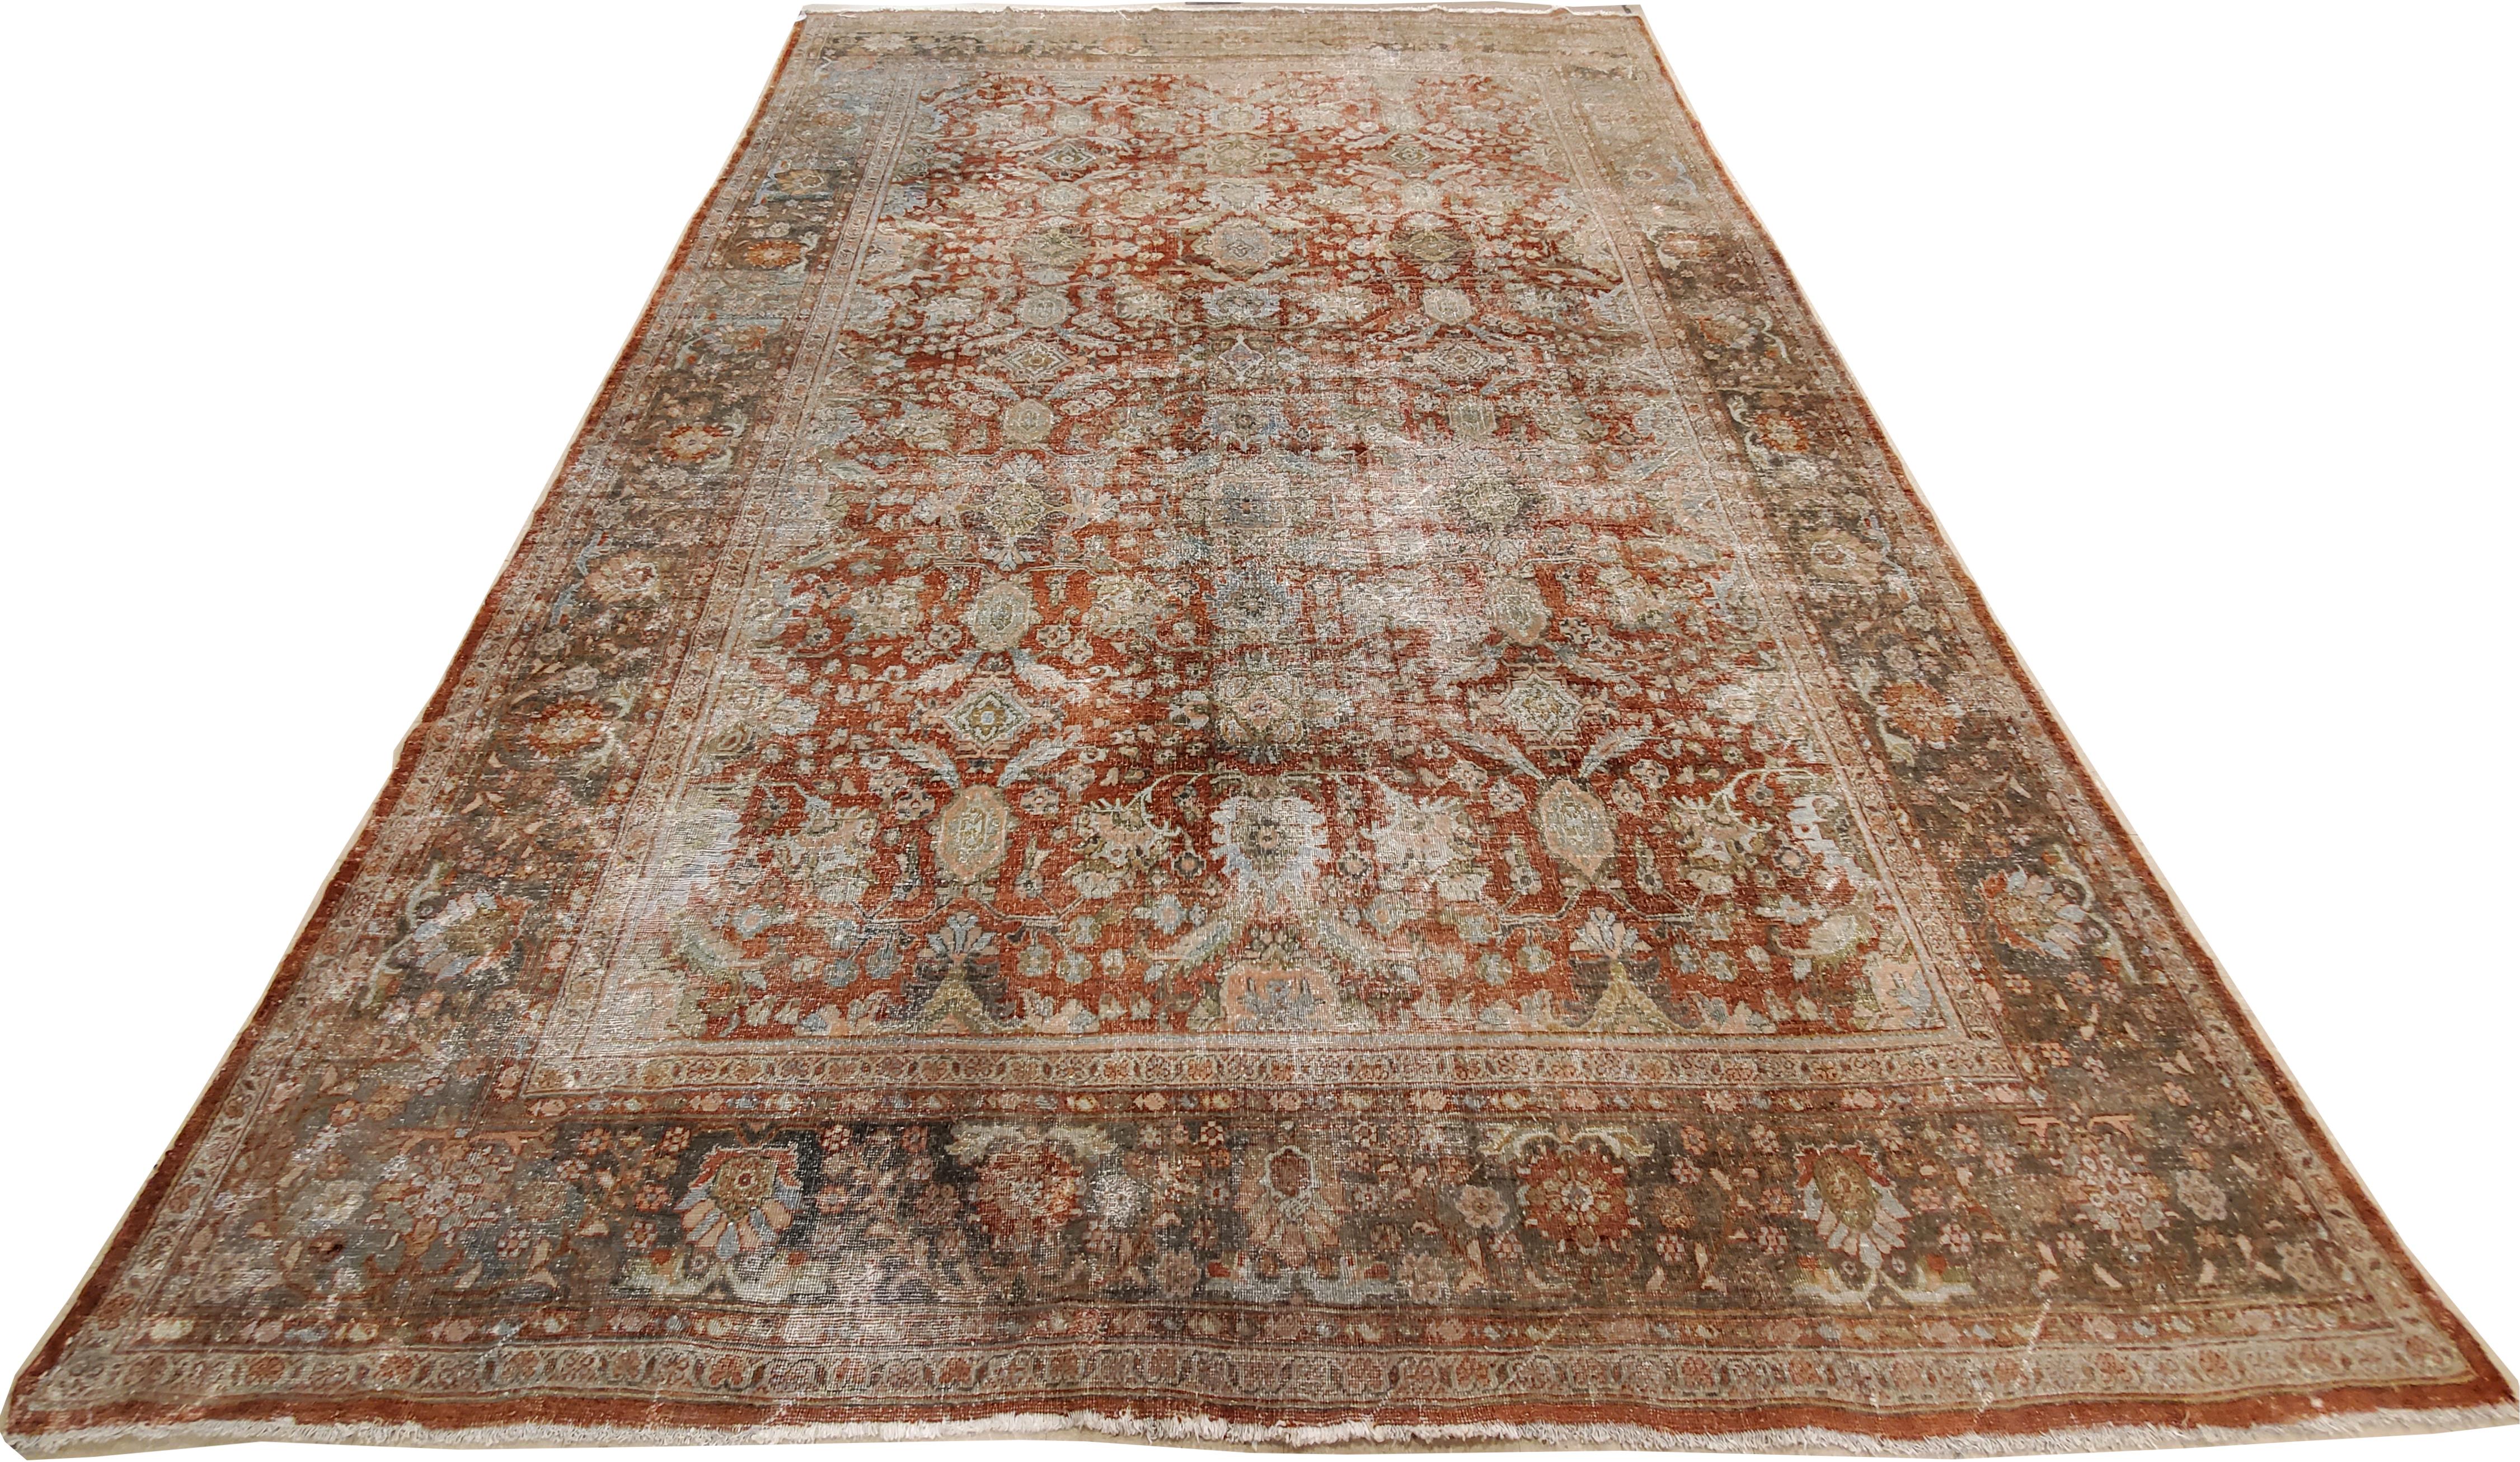 Antique Persian Sultanabad Carpet, Handmade Oriental Rug, Light Blue, Rust, Gray In Fair Condition For Sale In Port Washington, NY